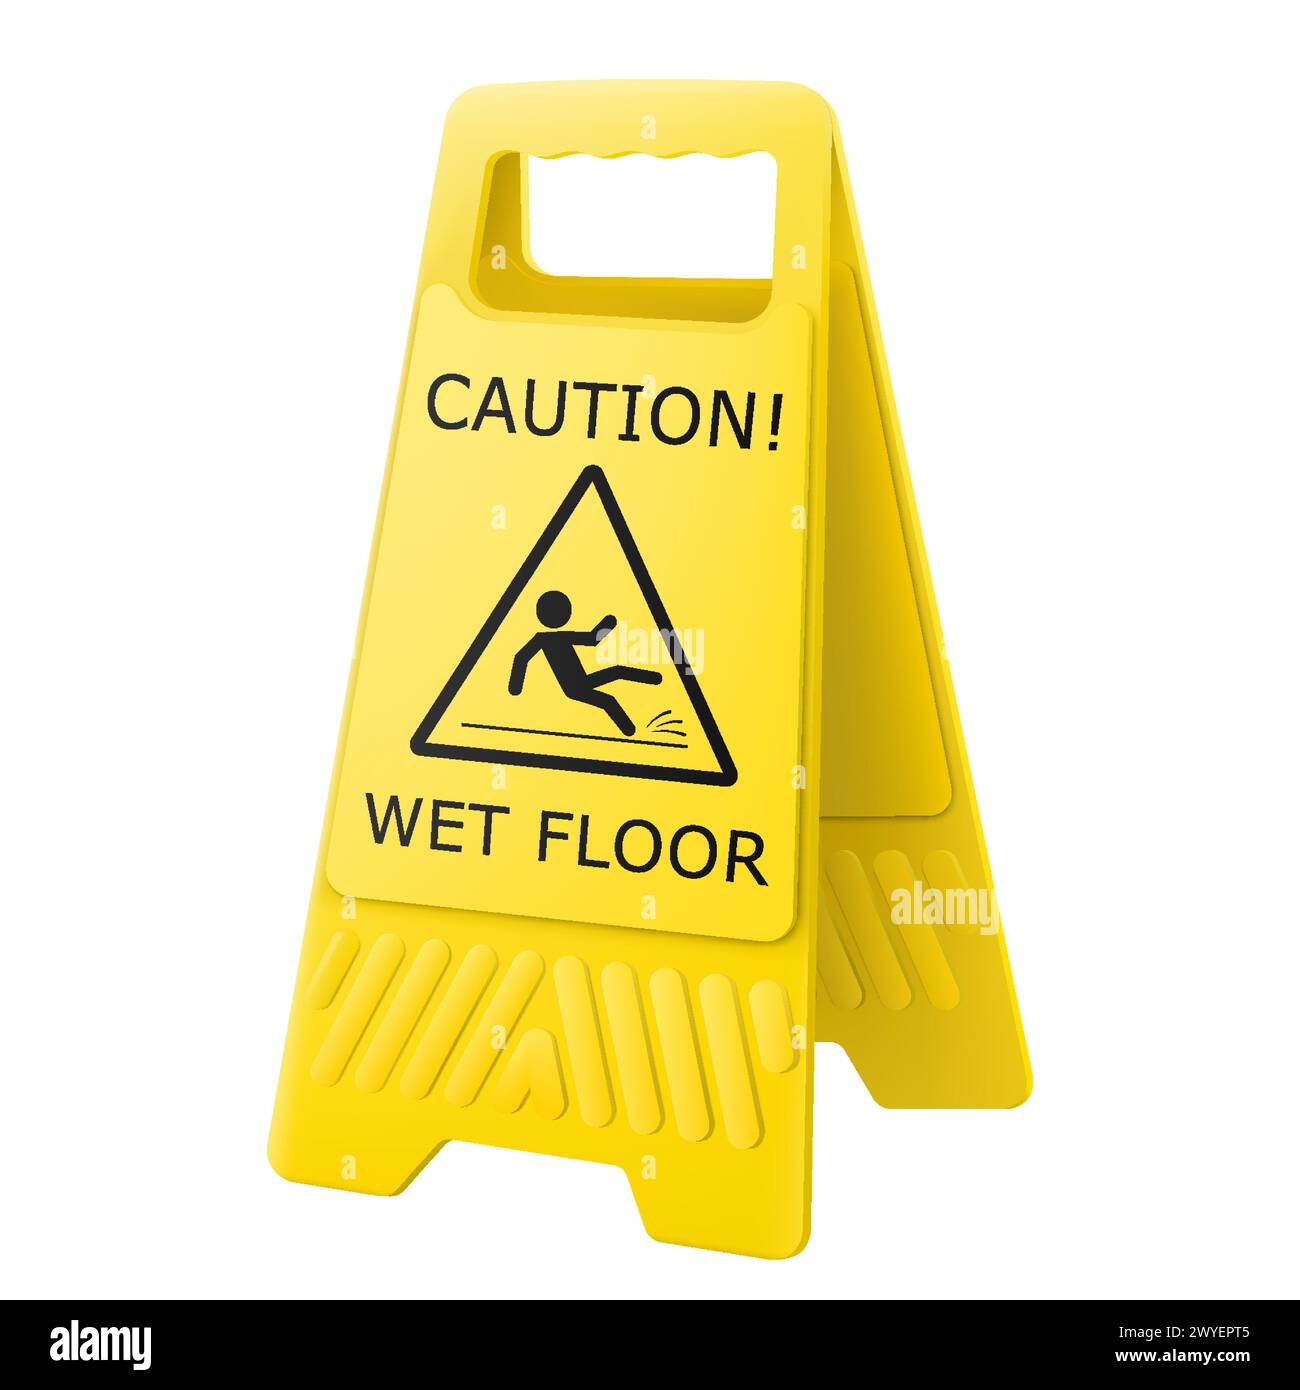 Wet floor caution sign isolated on white background. Double-sided folding yellow display stand with editable design. Slippery surface. Falling human p Stock Vector